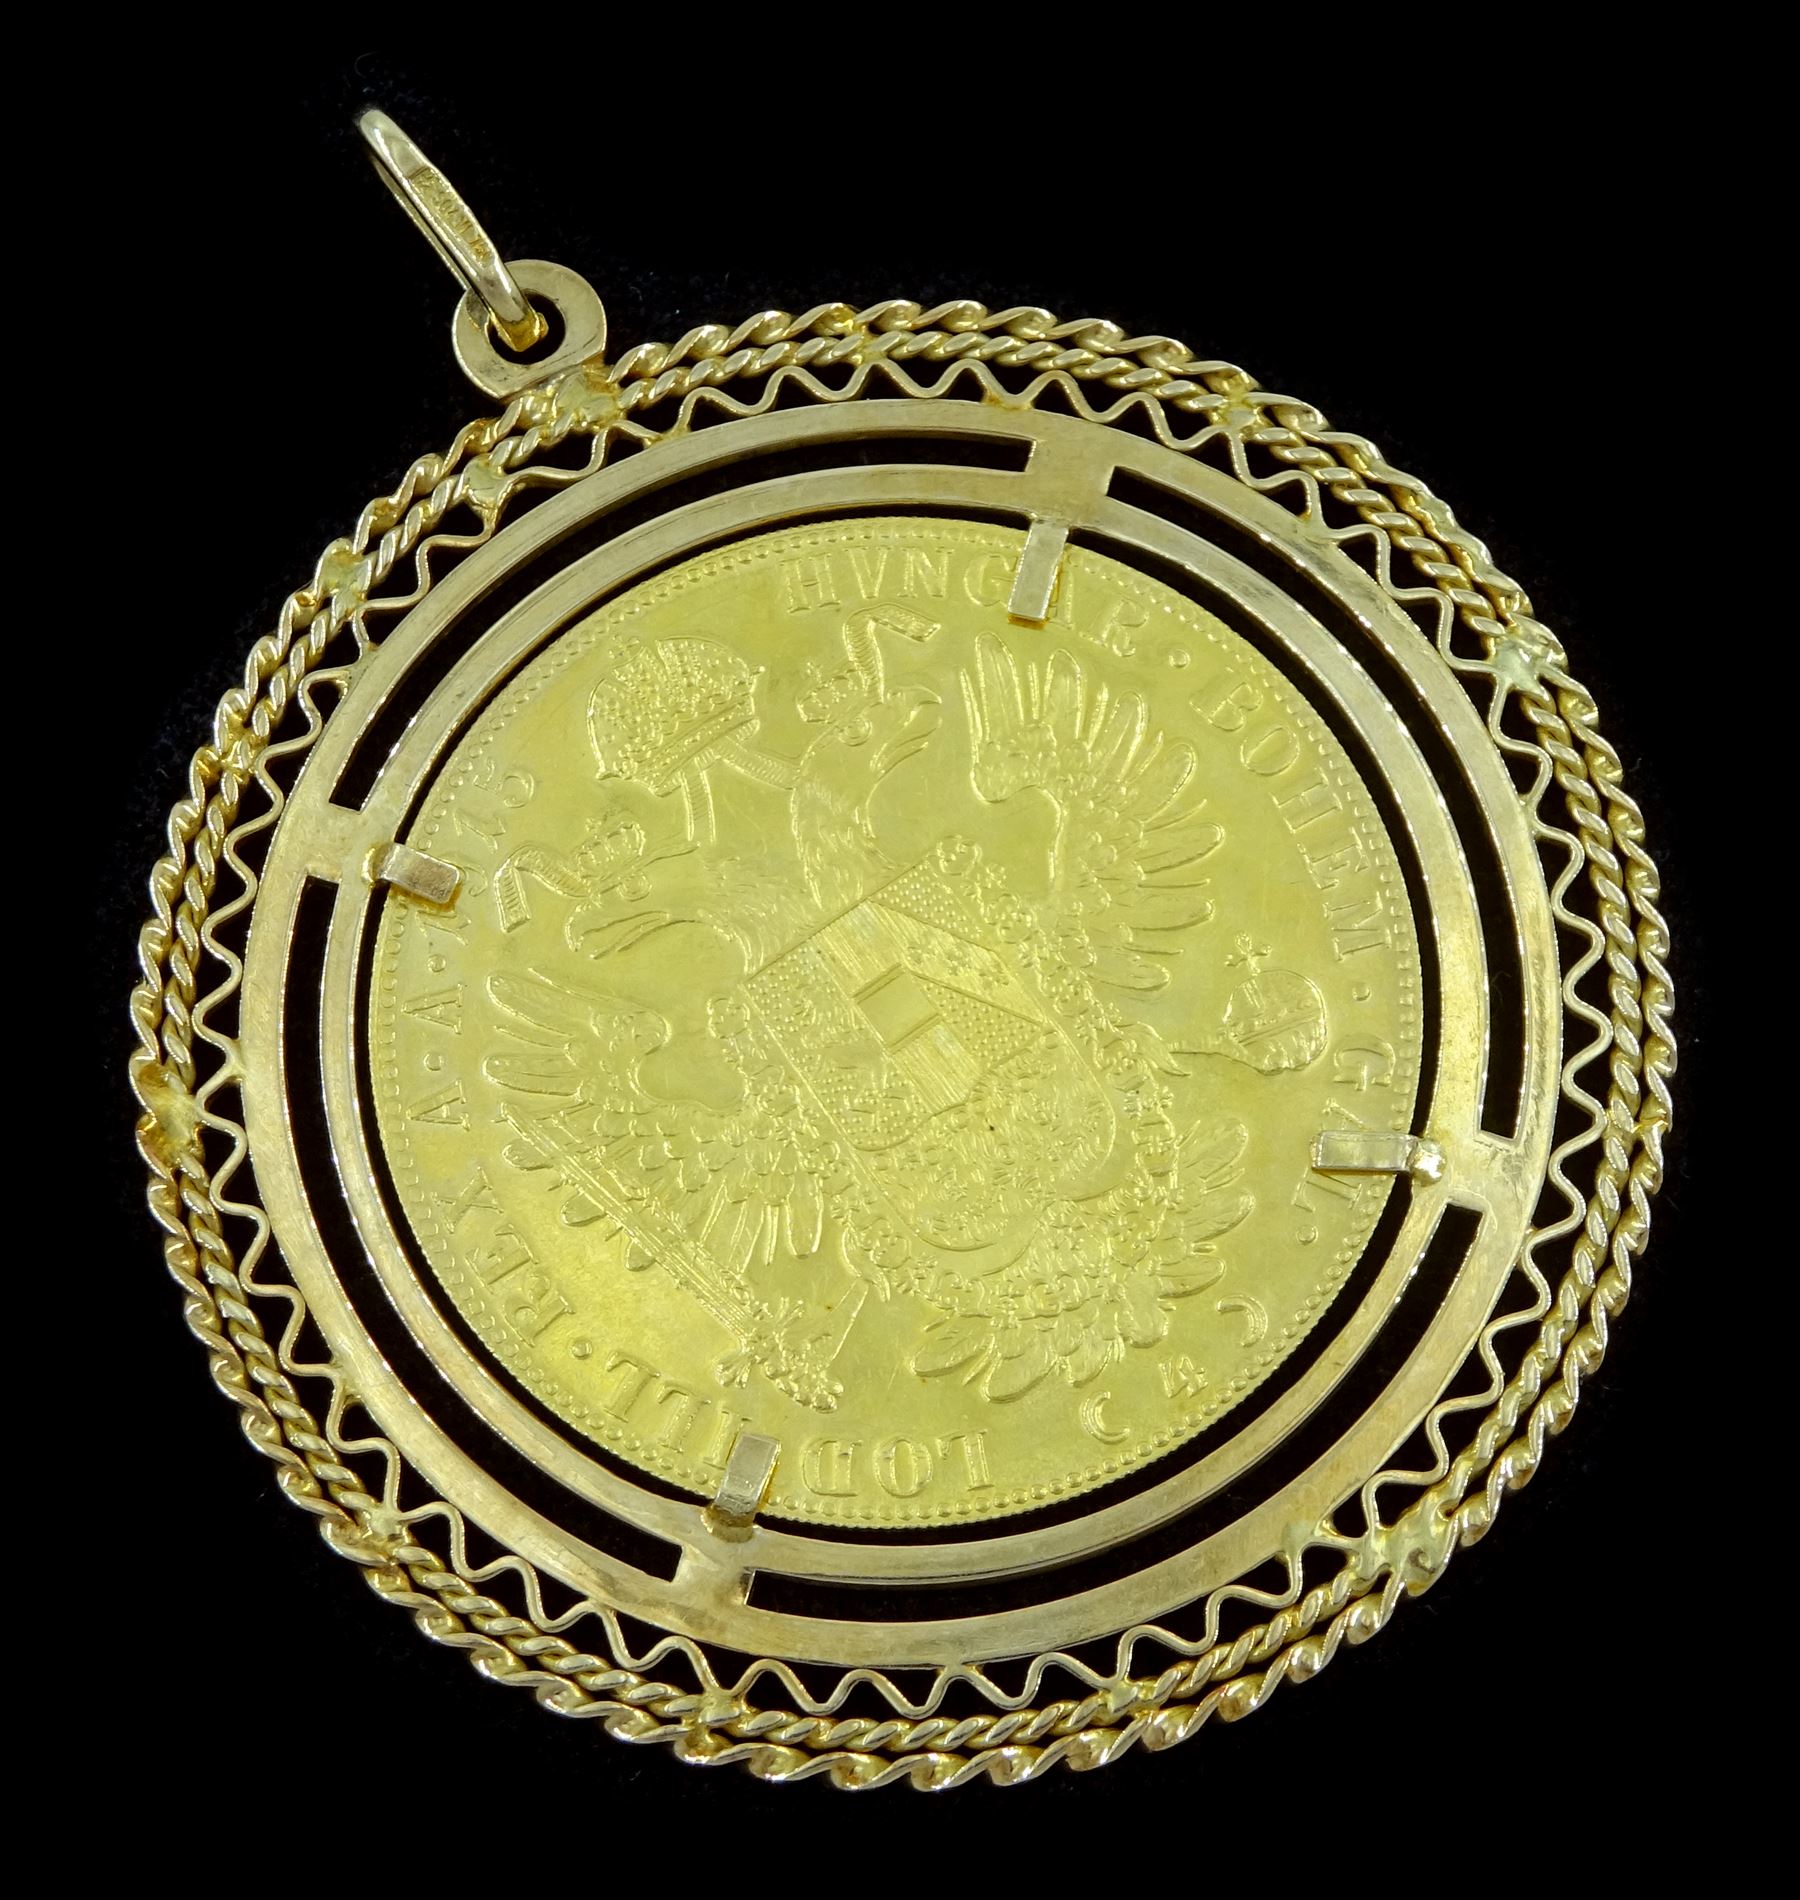 Austria 1914 restrike four ducat gold coin loose mounted in an 18ct gold fancy frame as a pendant - Image 2 of 2